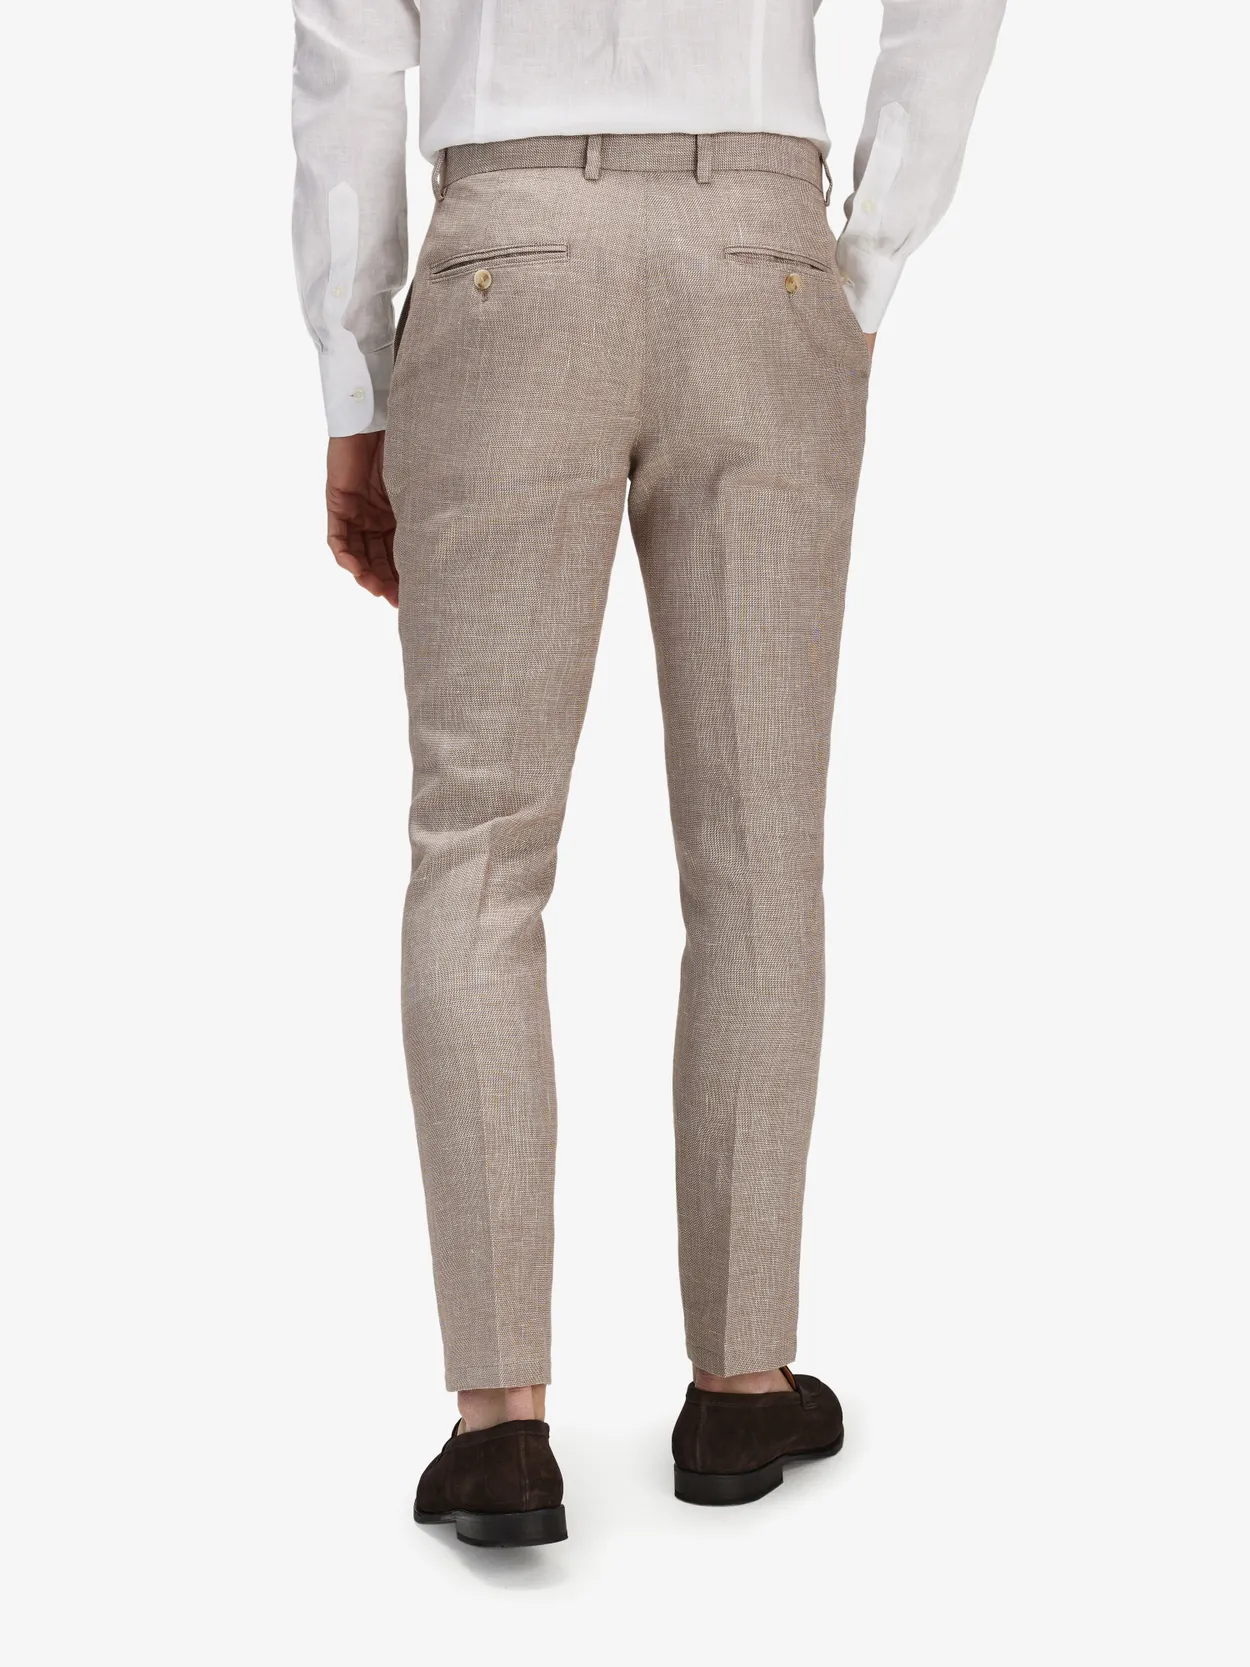 Buy Beige Linen Pleated Pants For Men by Son of A Noble Snob